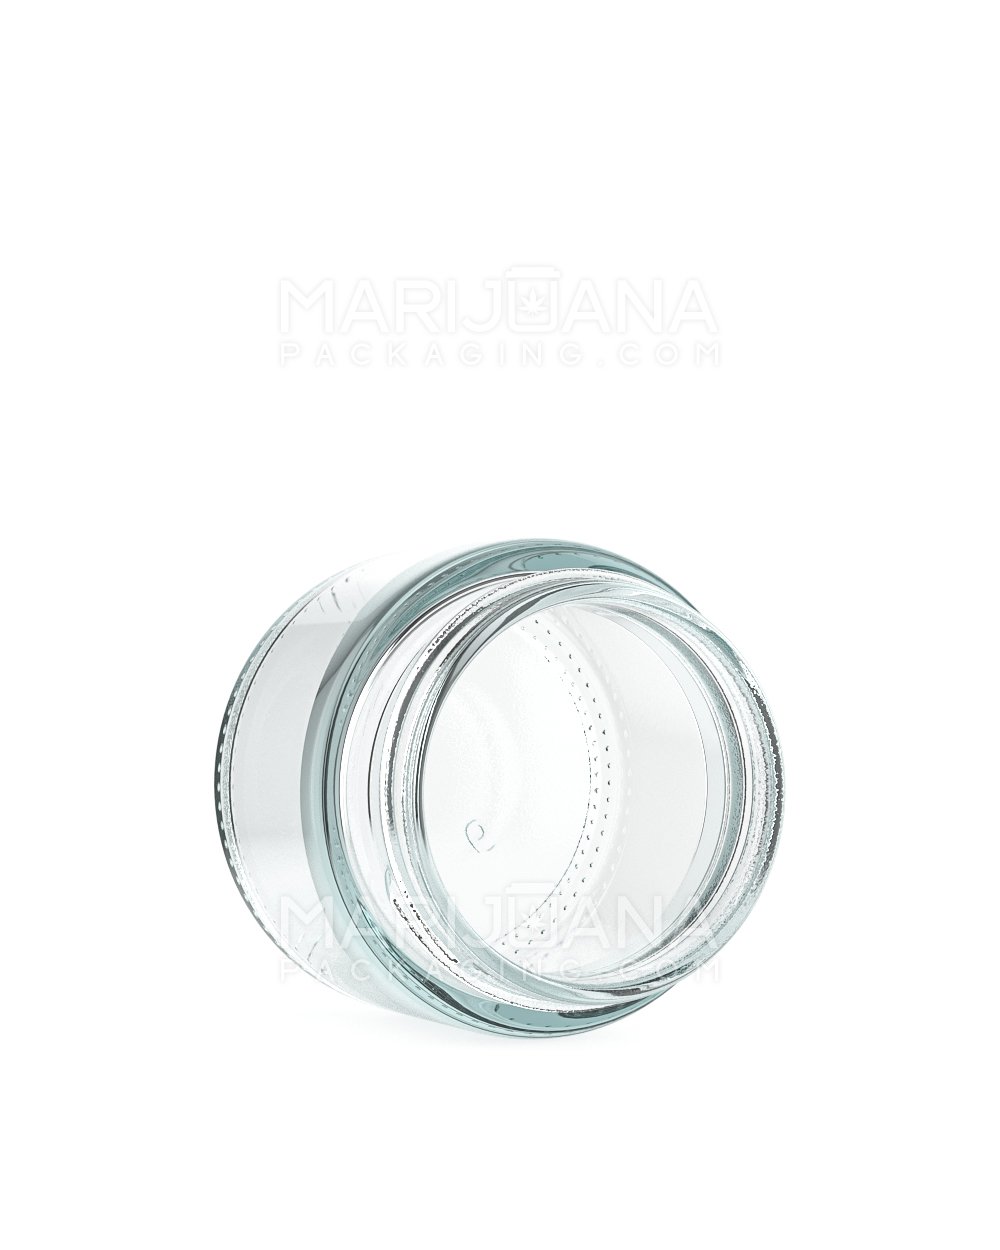 Straight Sided Clear Glass Jars with Black Cap | 53mm - 2oz - 240 Count - 4